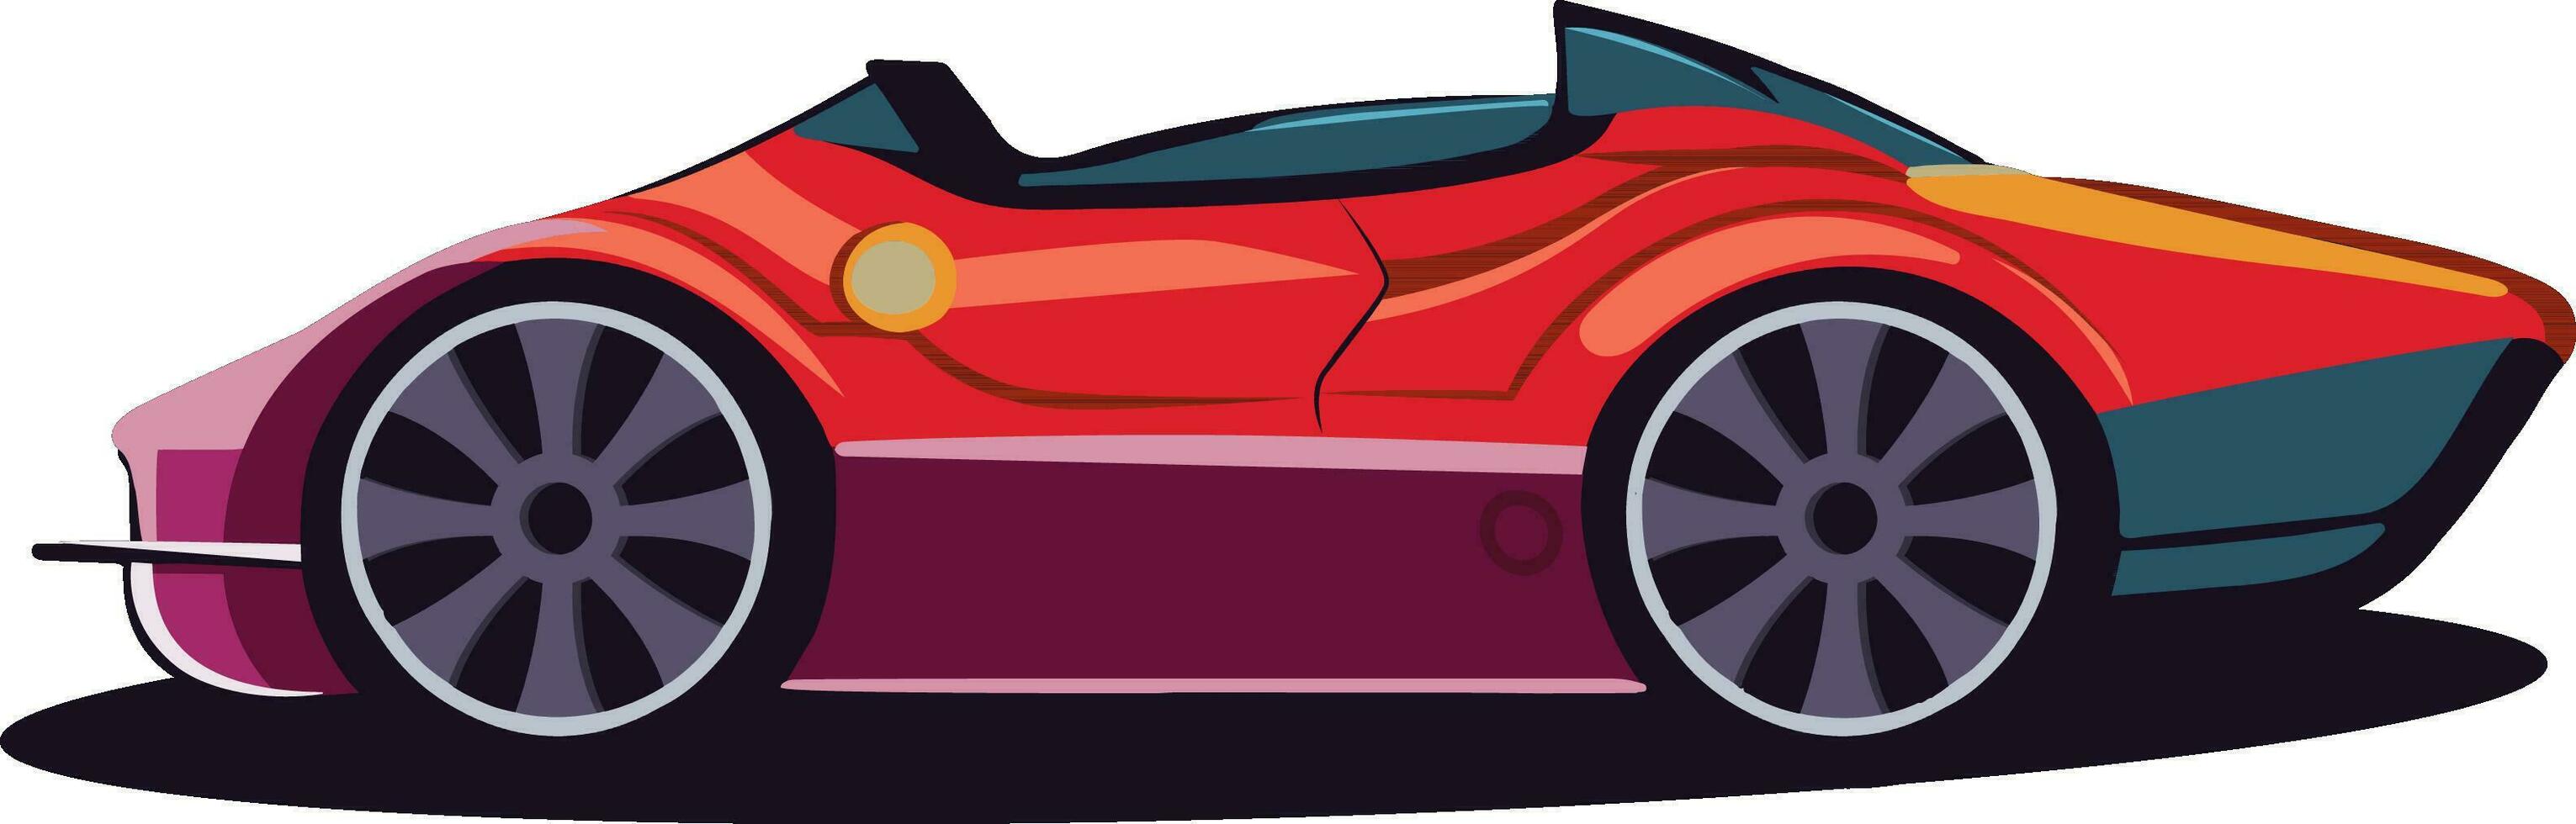 Isolated Convertible Car Element In Red Color. vector